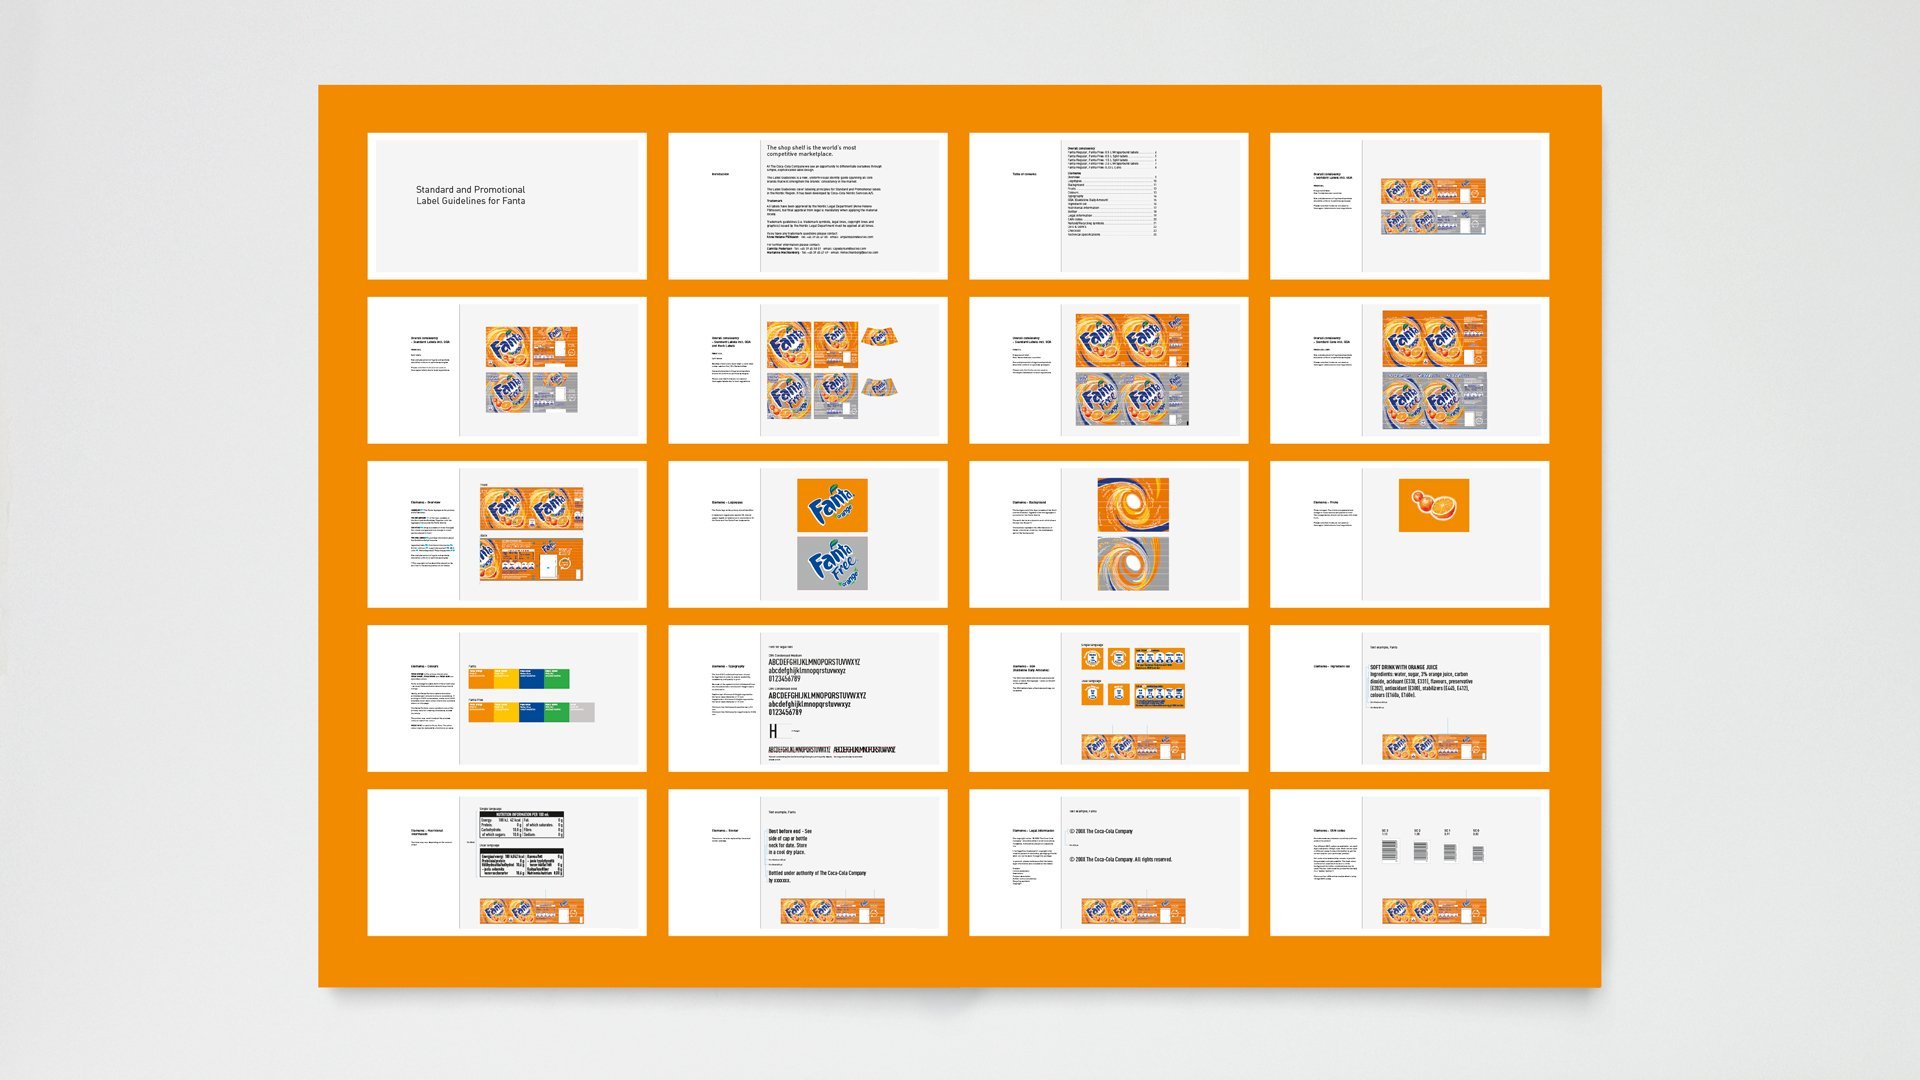 Fanta style guide overview by LOOP Associates